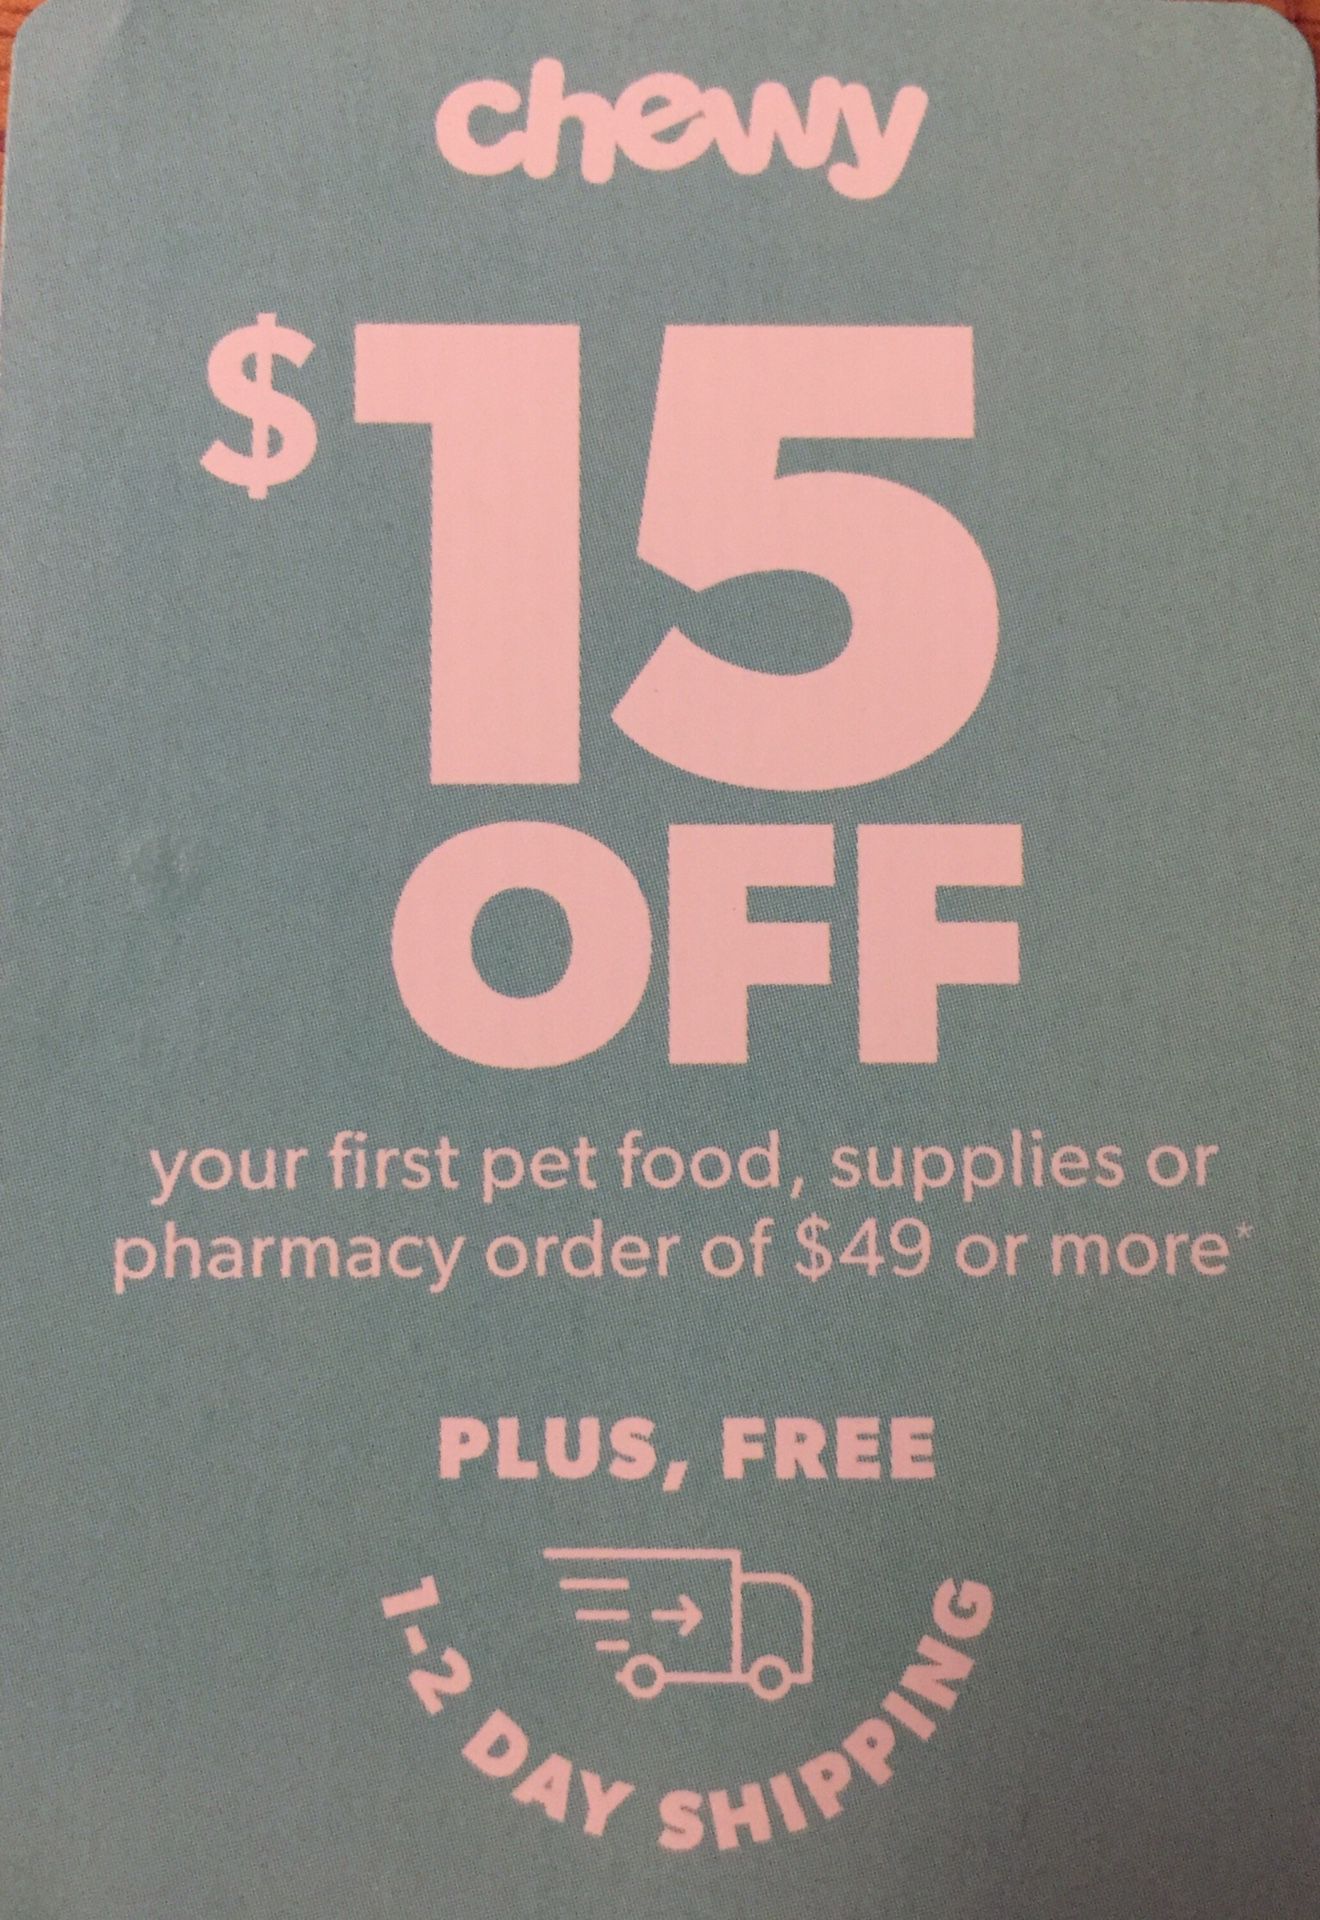 Chewy coupon $15 off